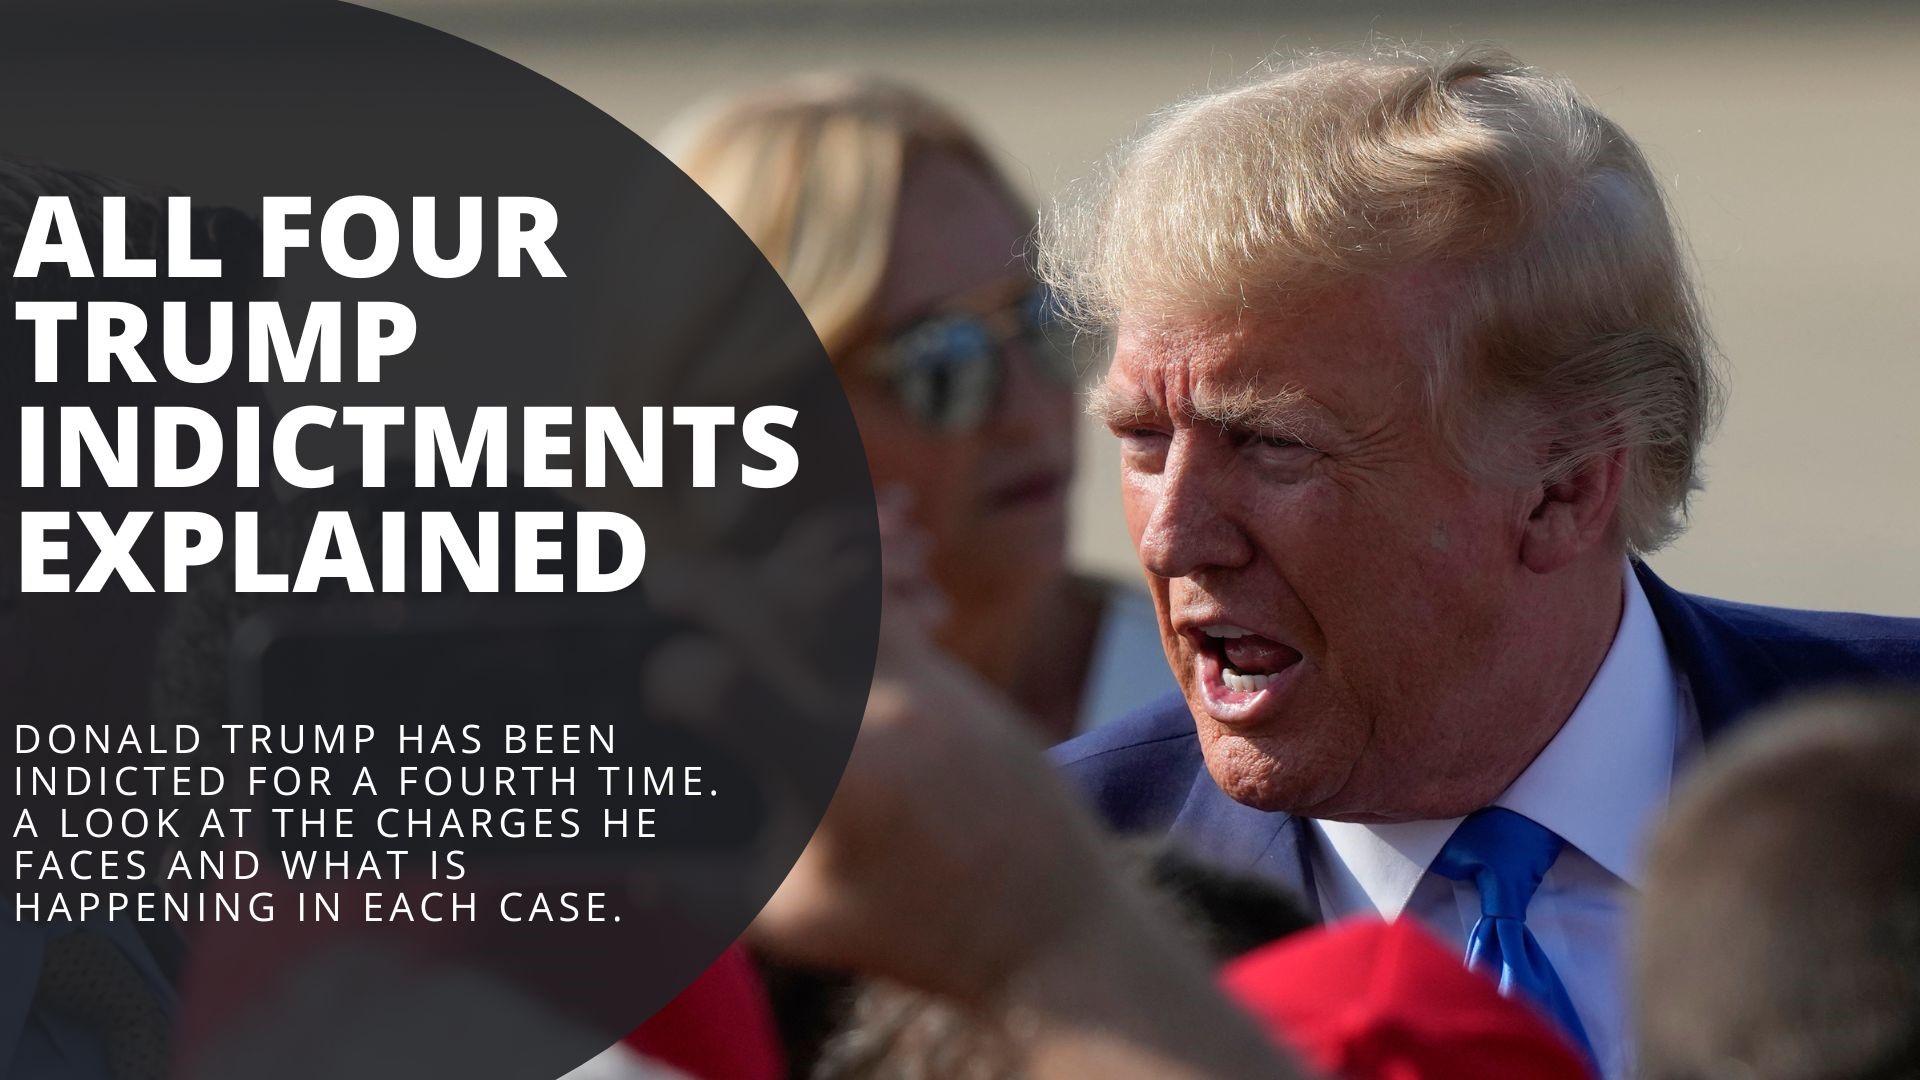 Donald Trump has now been indicted for a fourth time. A look at all of the charges the former president faces and explaining the four cases.